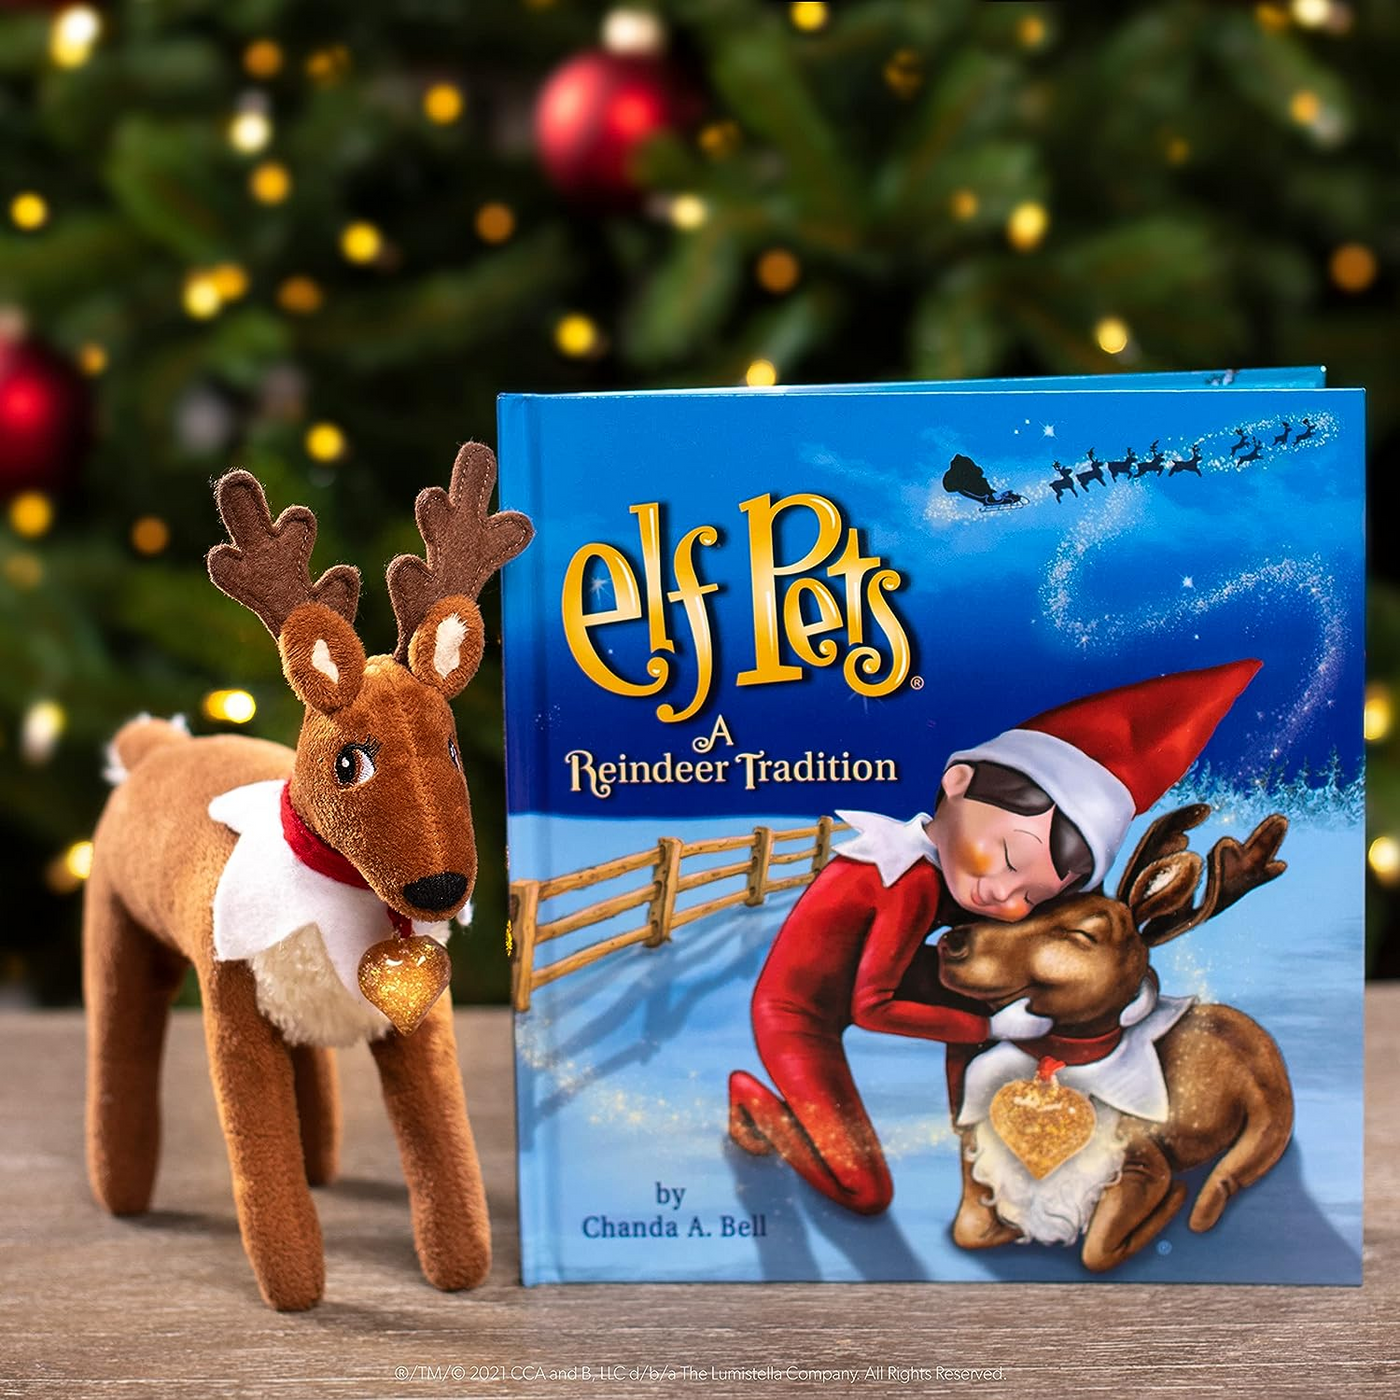 Elf On The Shelf Pets Add To The Magic Of Christmas